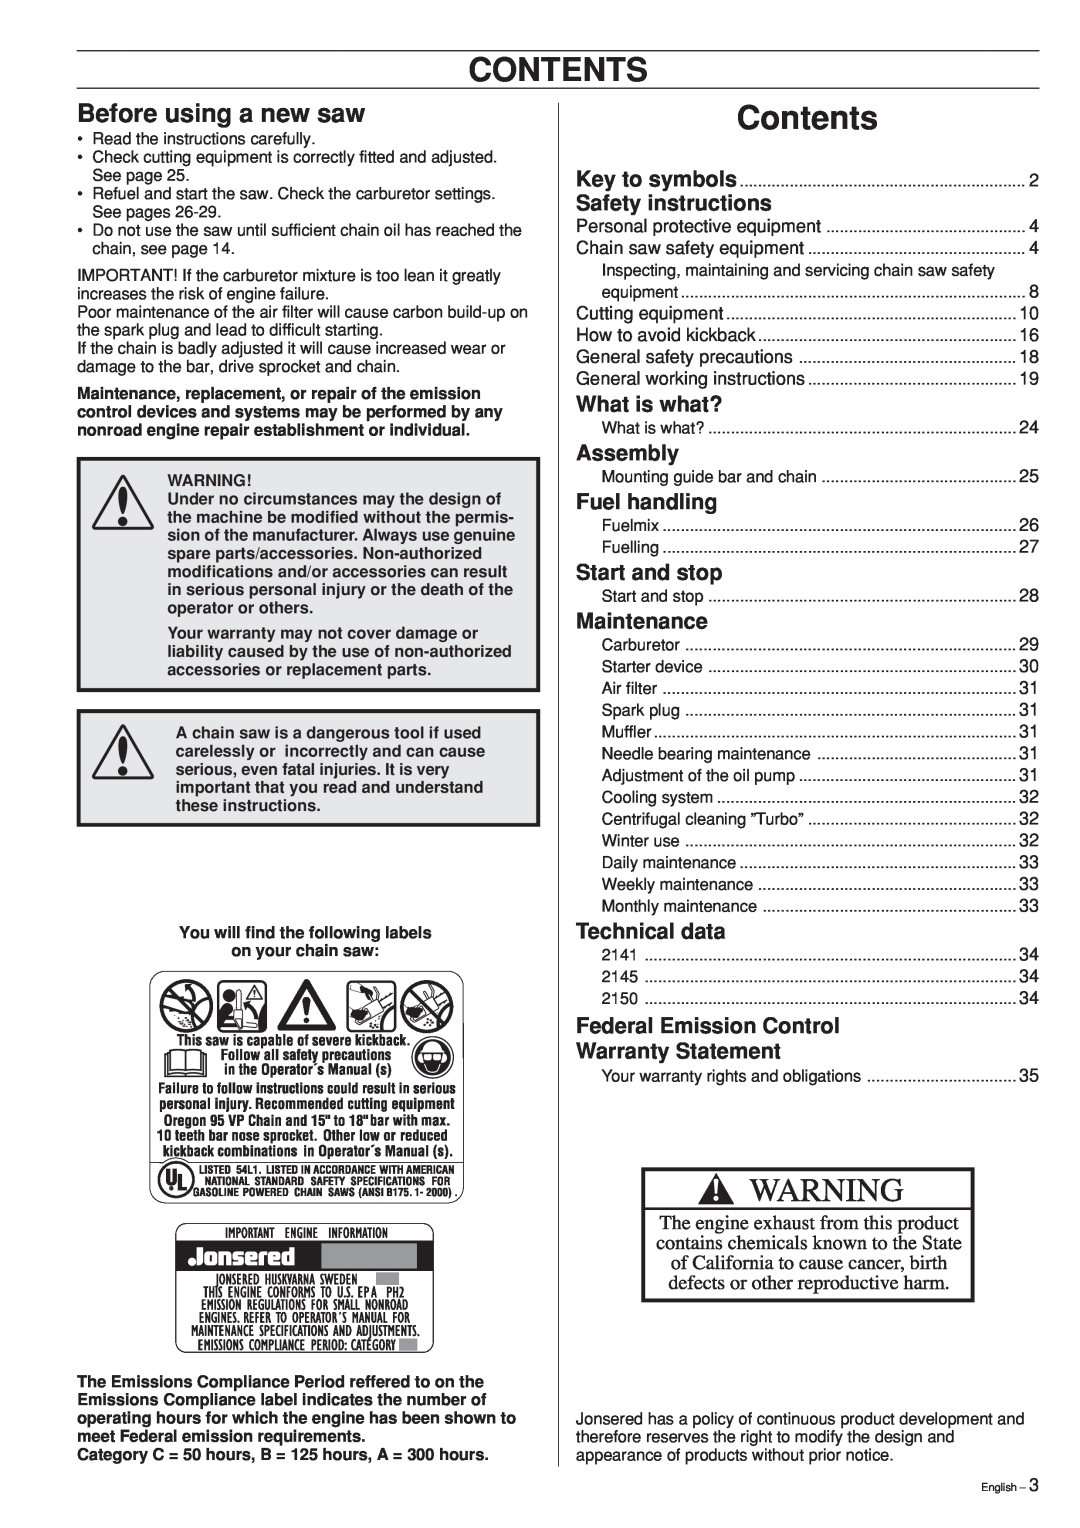 Jonsered 2141 Contents, Before using a new saw, Safety instructions, What is what?, Assembly, Fuel handling, Maintenance 